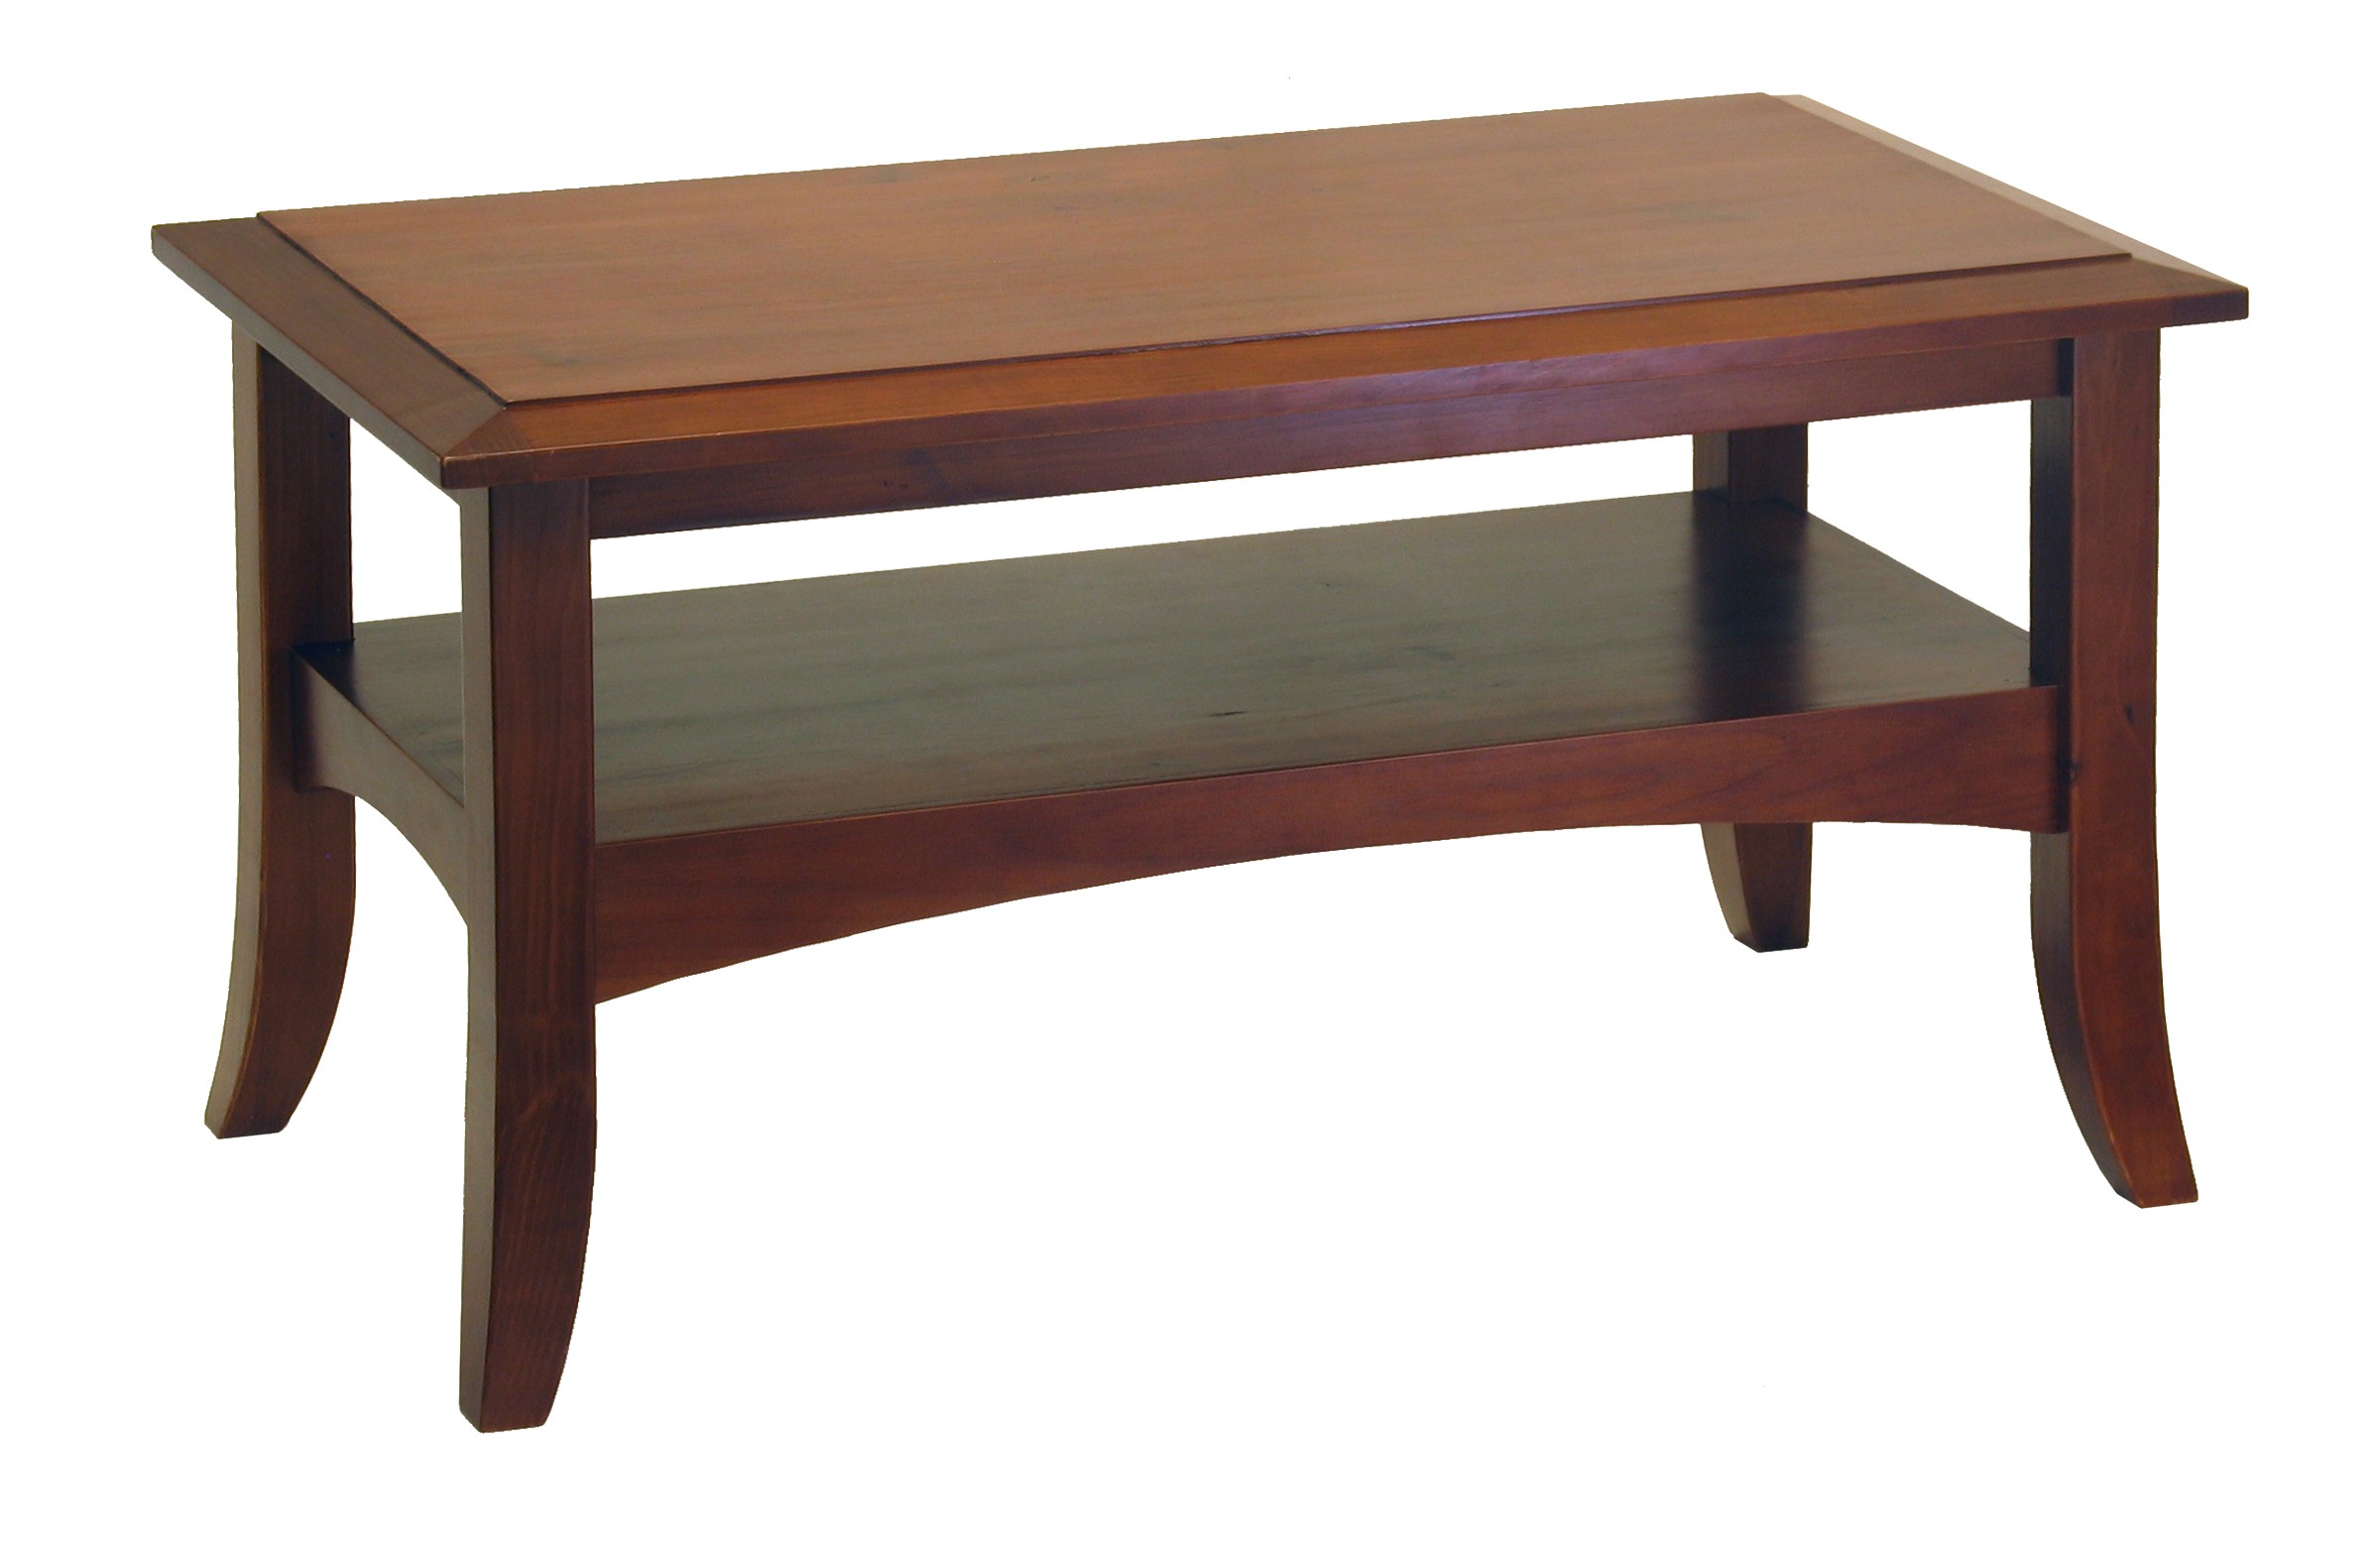 Winsome Wood Craftsman Coffee Table, Antique Walnut